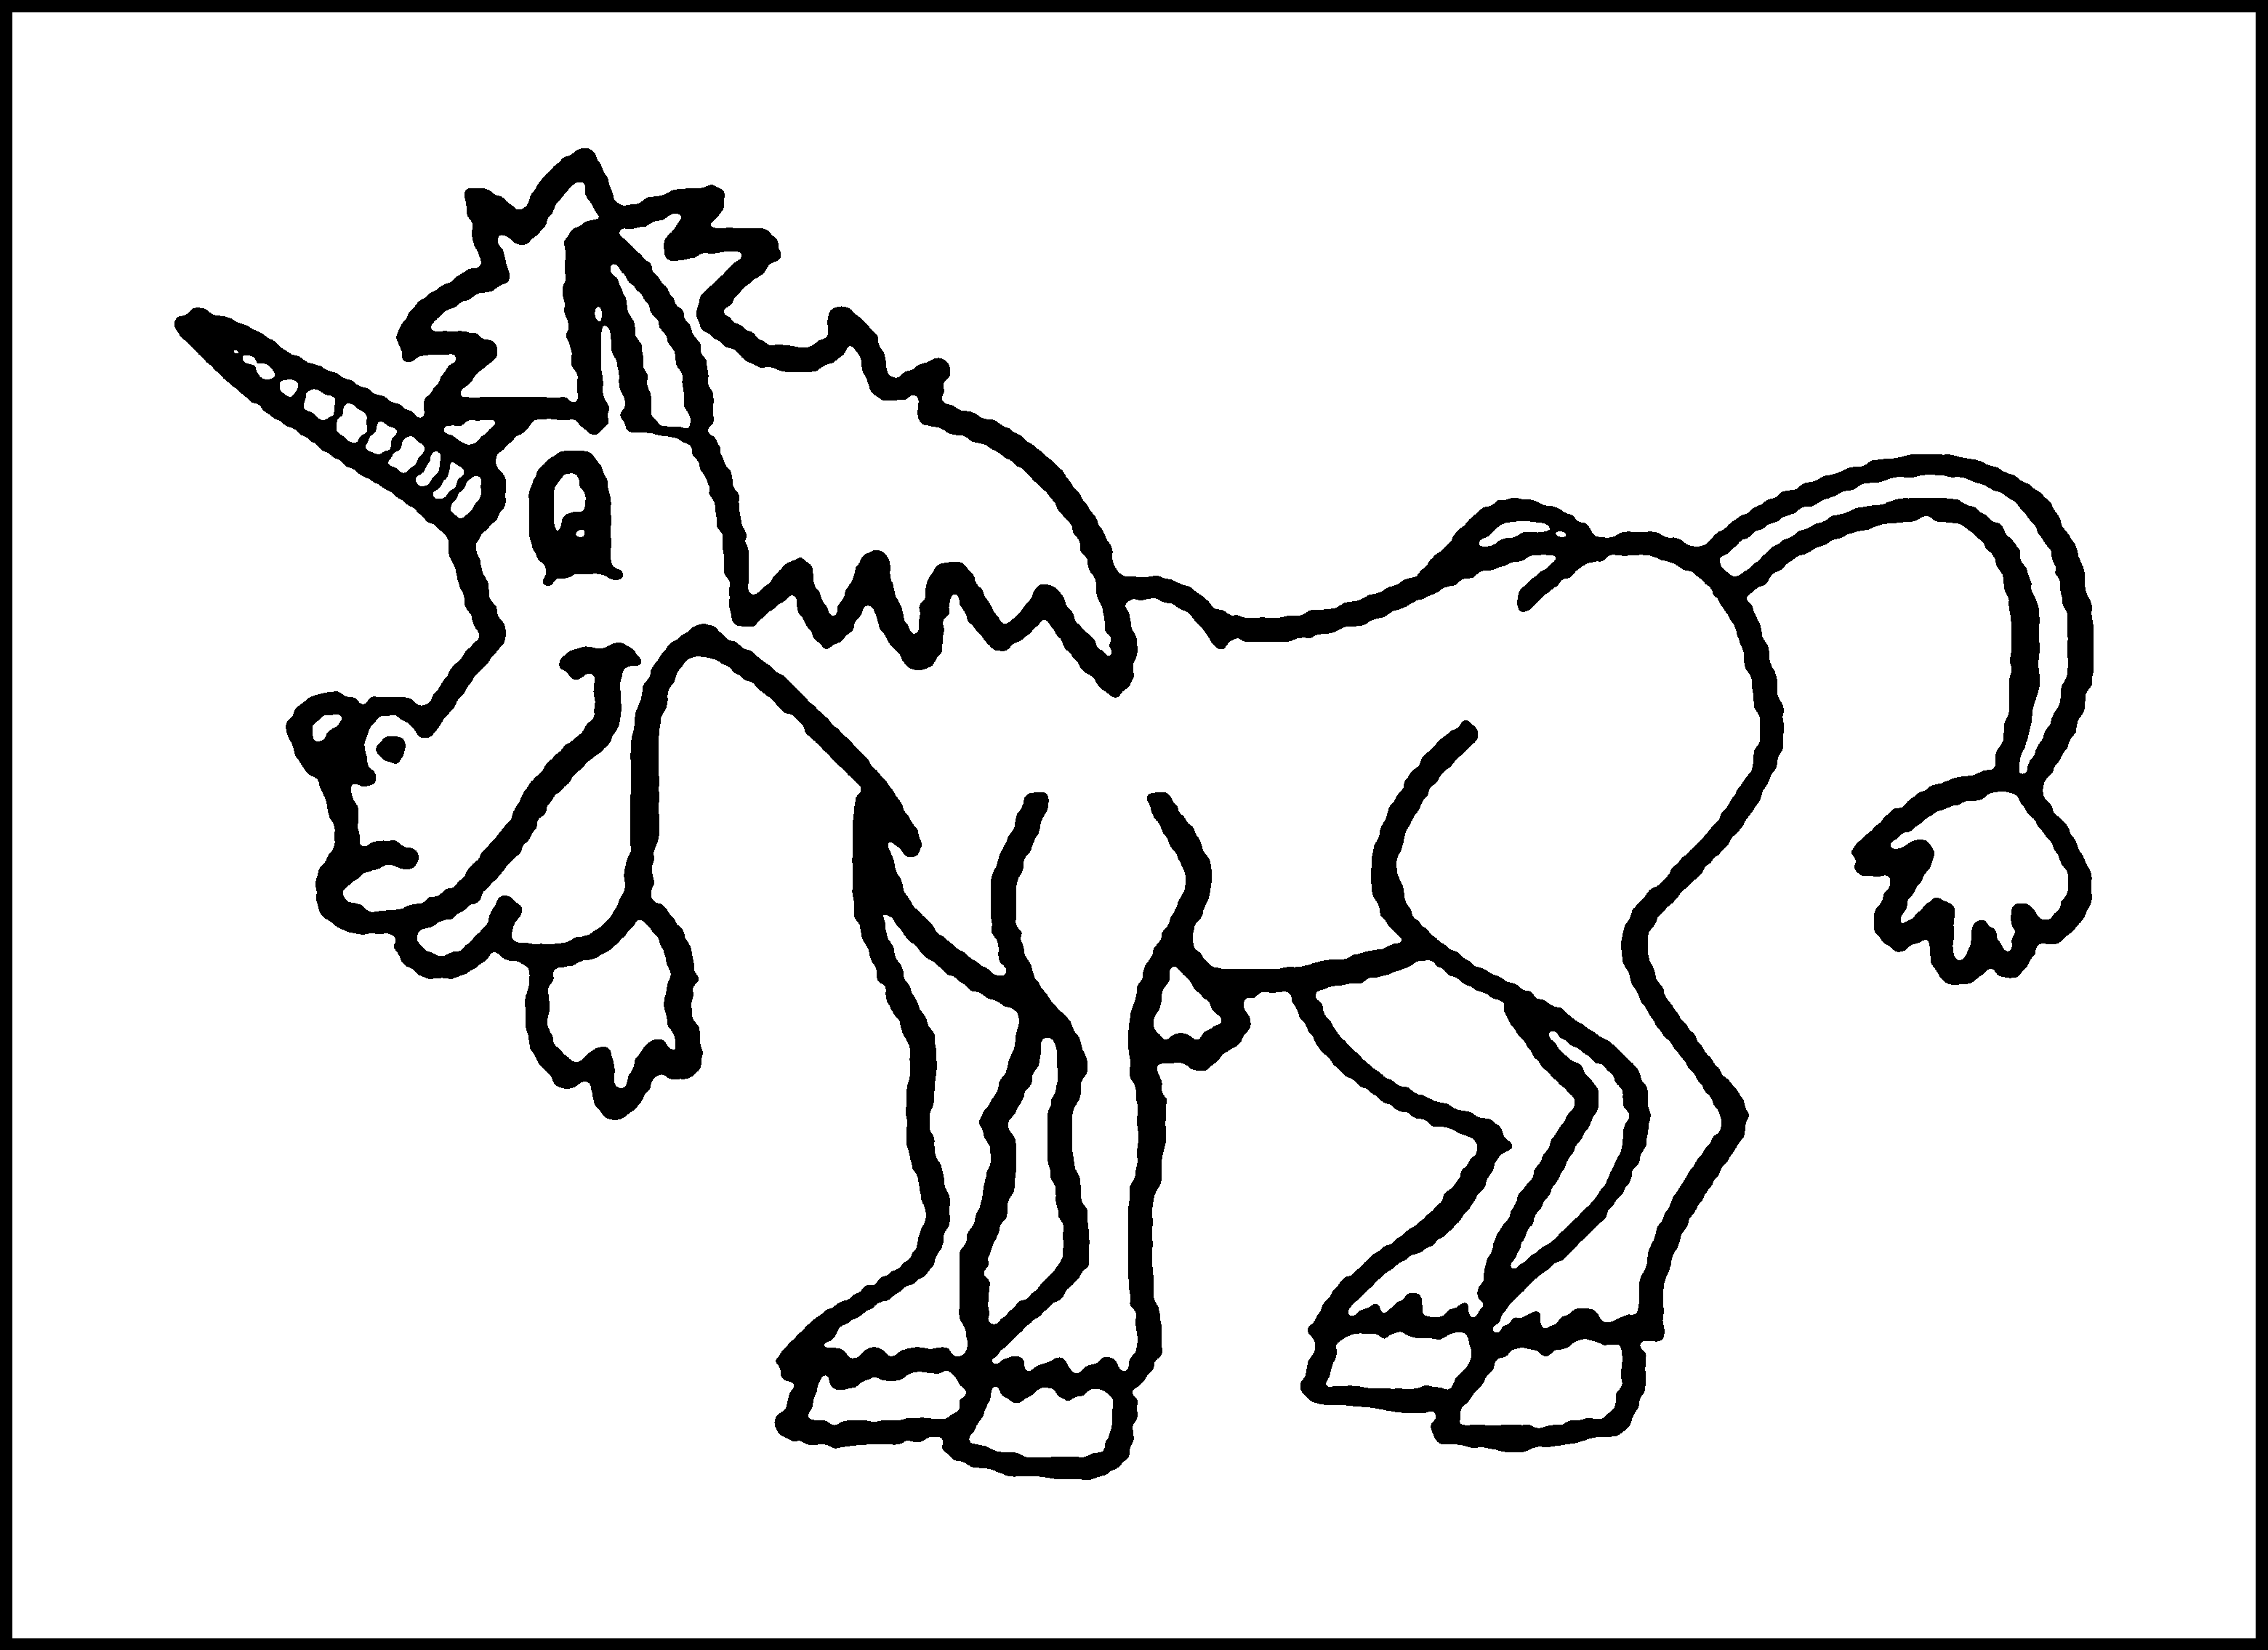 unicorn coloring pages free printables